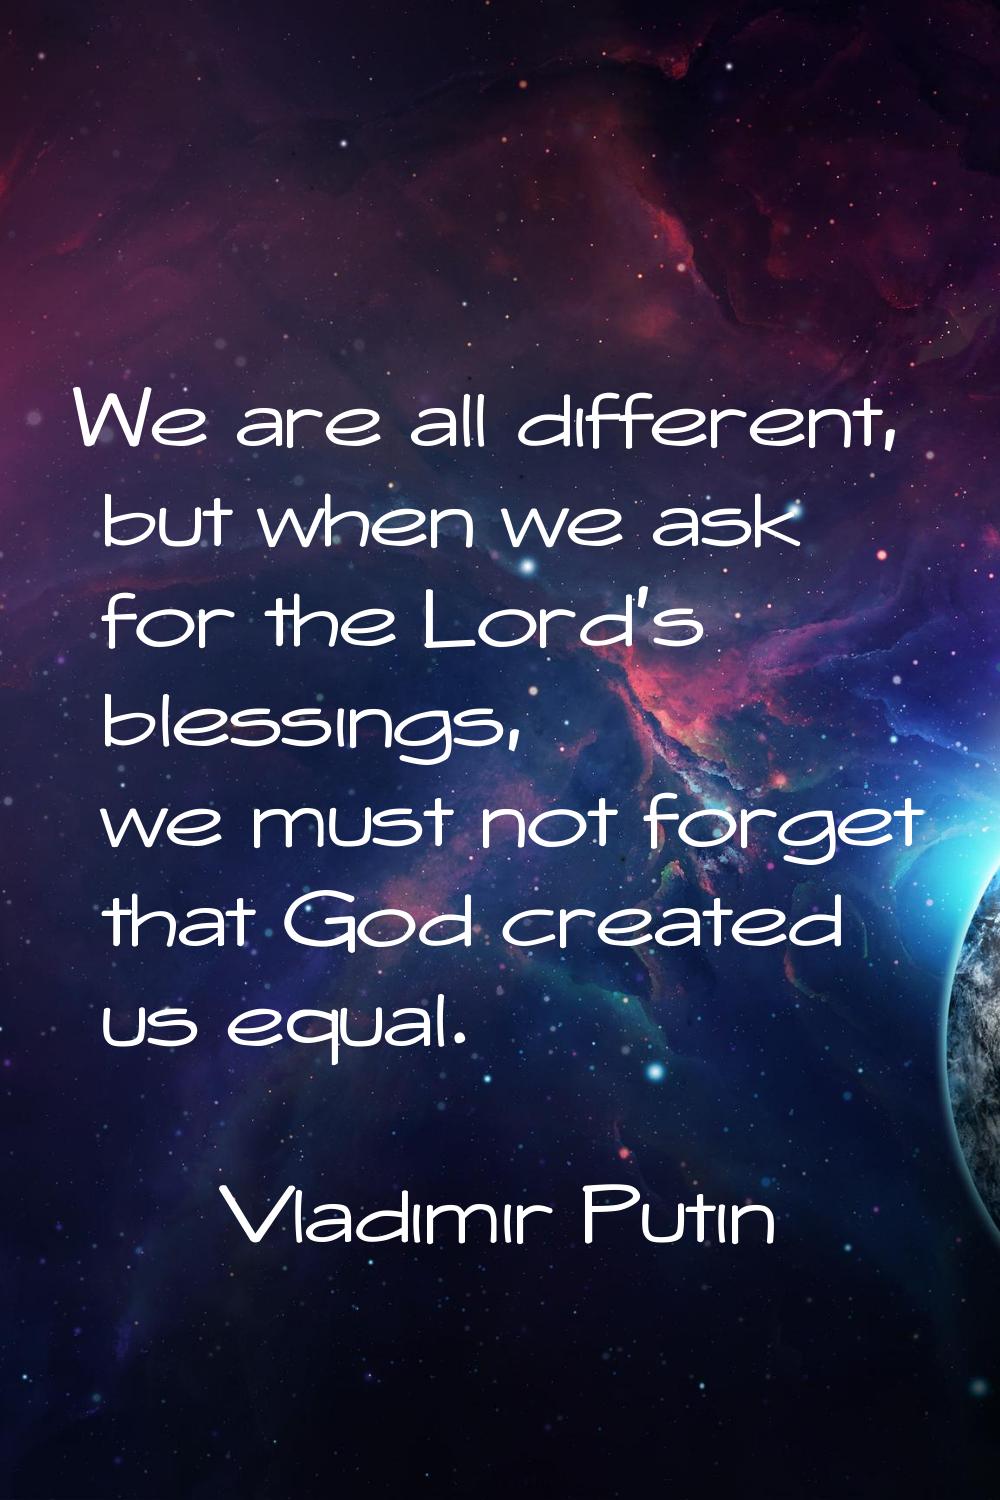 We are all different, but when we ask for the Lord's blessings, we must not forget that God created